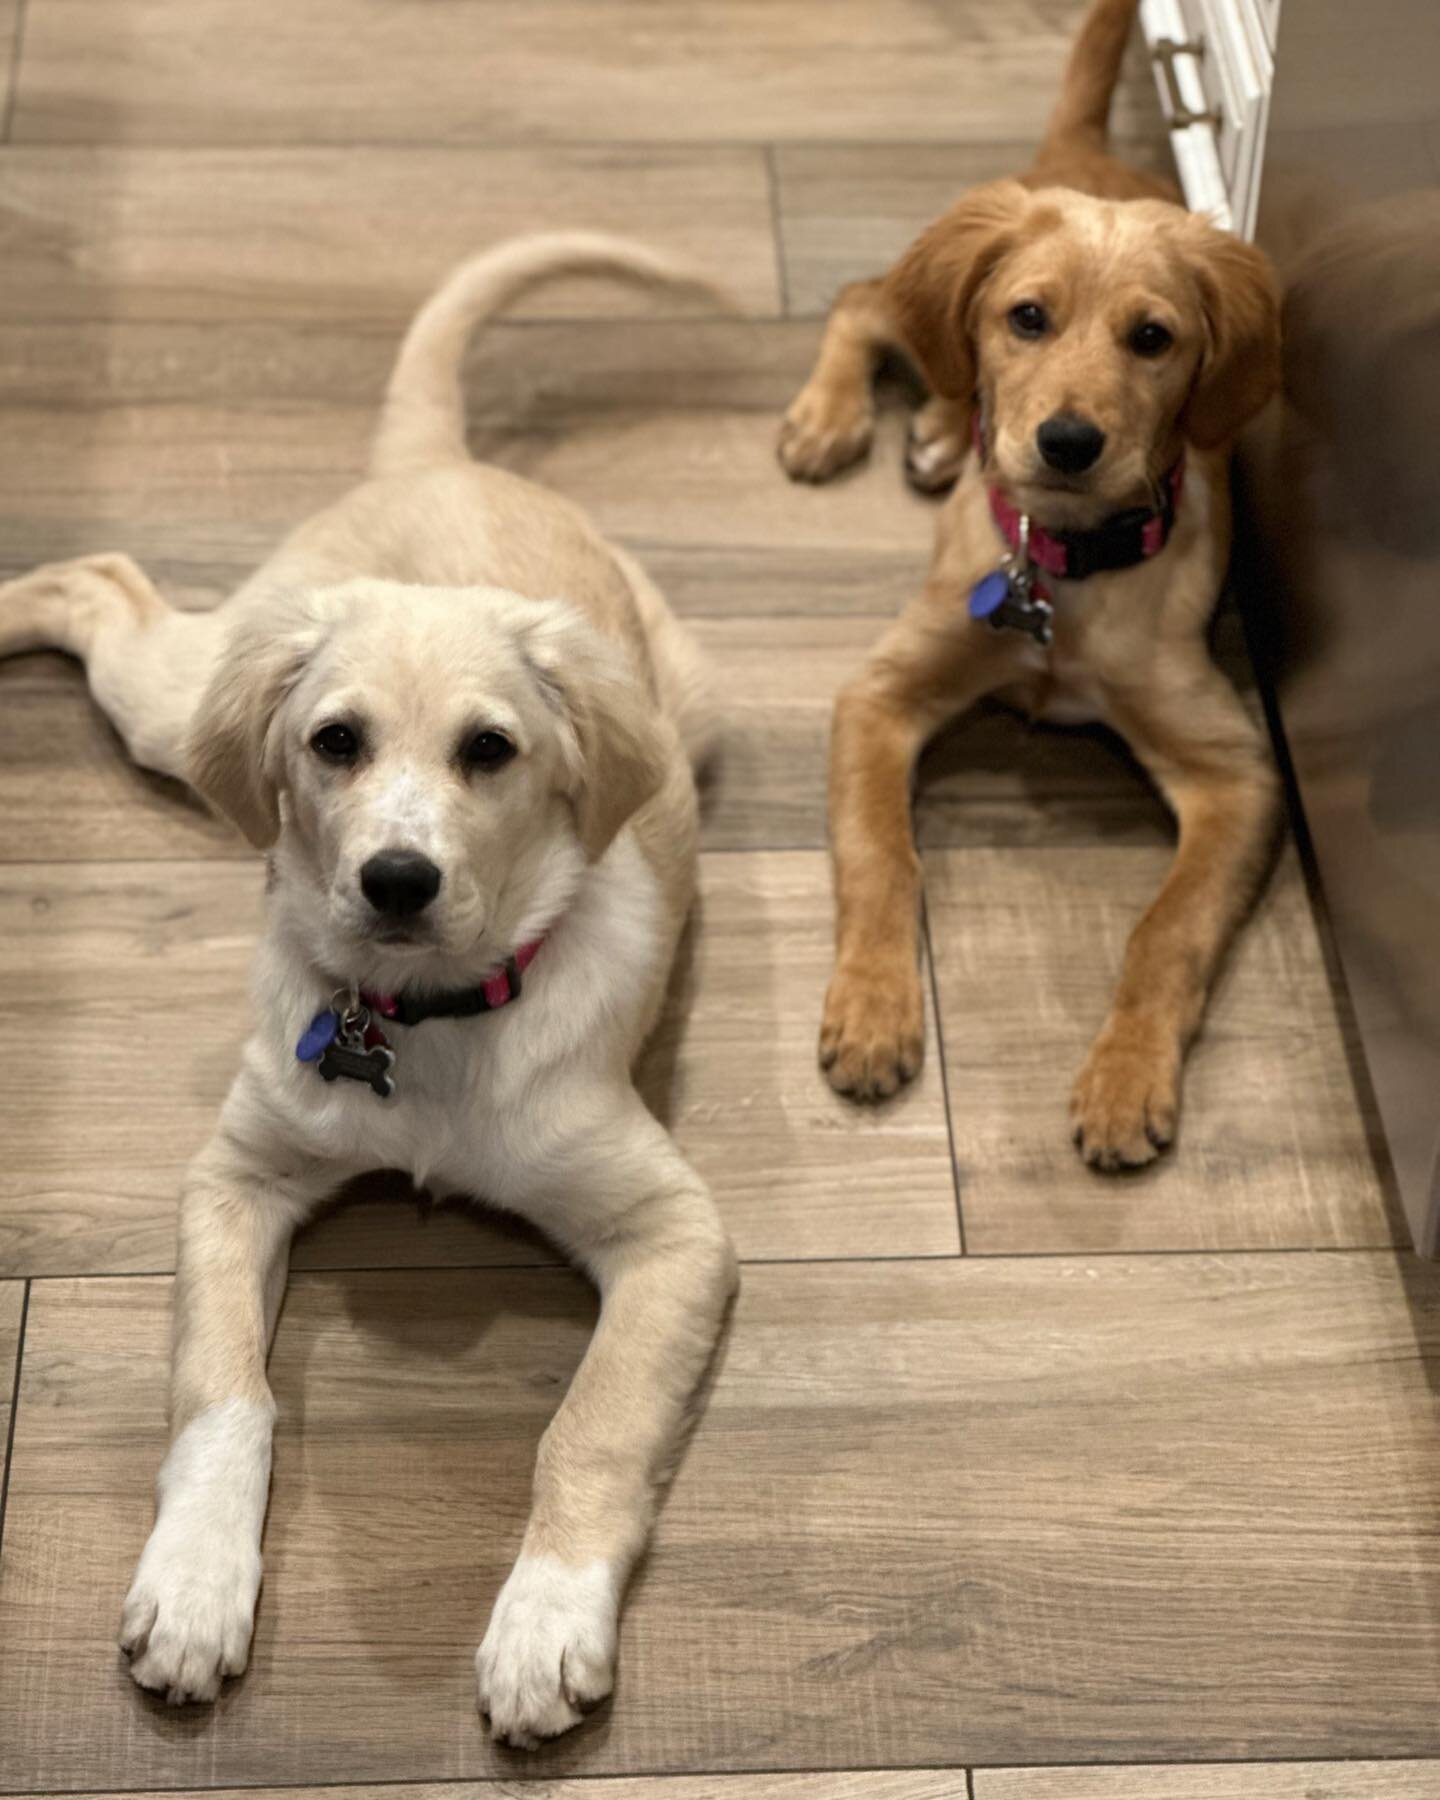 Introducing our May pets of the month. This month is a pair named Indy (on the left) and Anna (on the right). These two sweeties bring joy wherever they go ❤️❤️ We can&rsquo;t wait to see them grow!